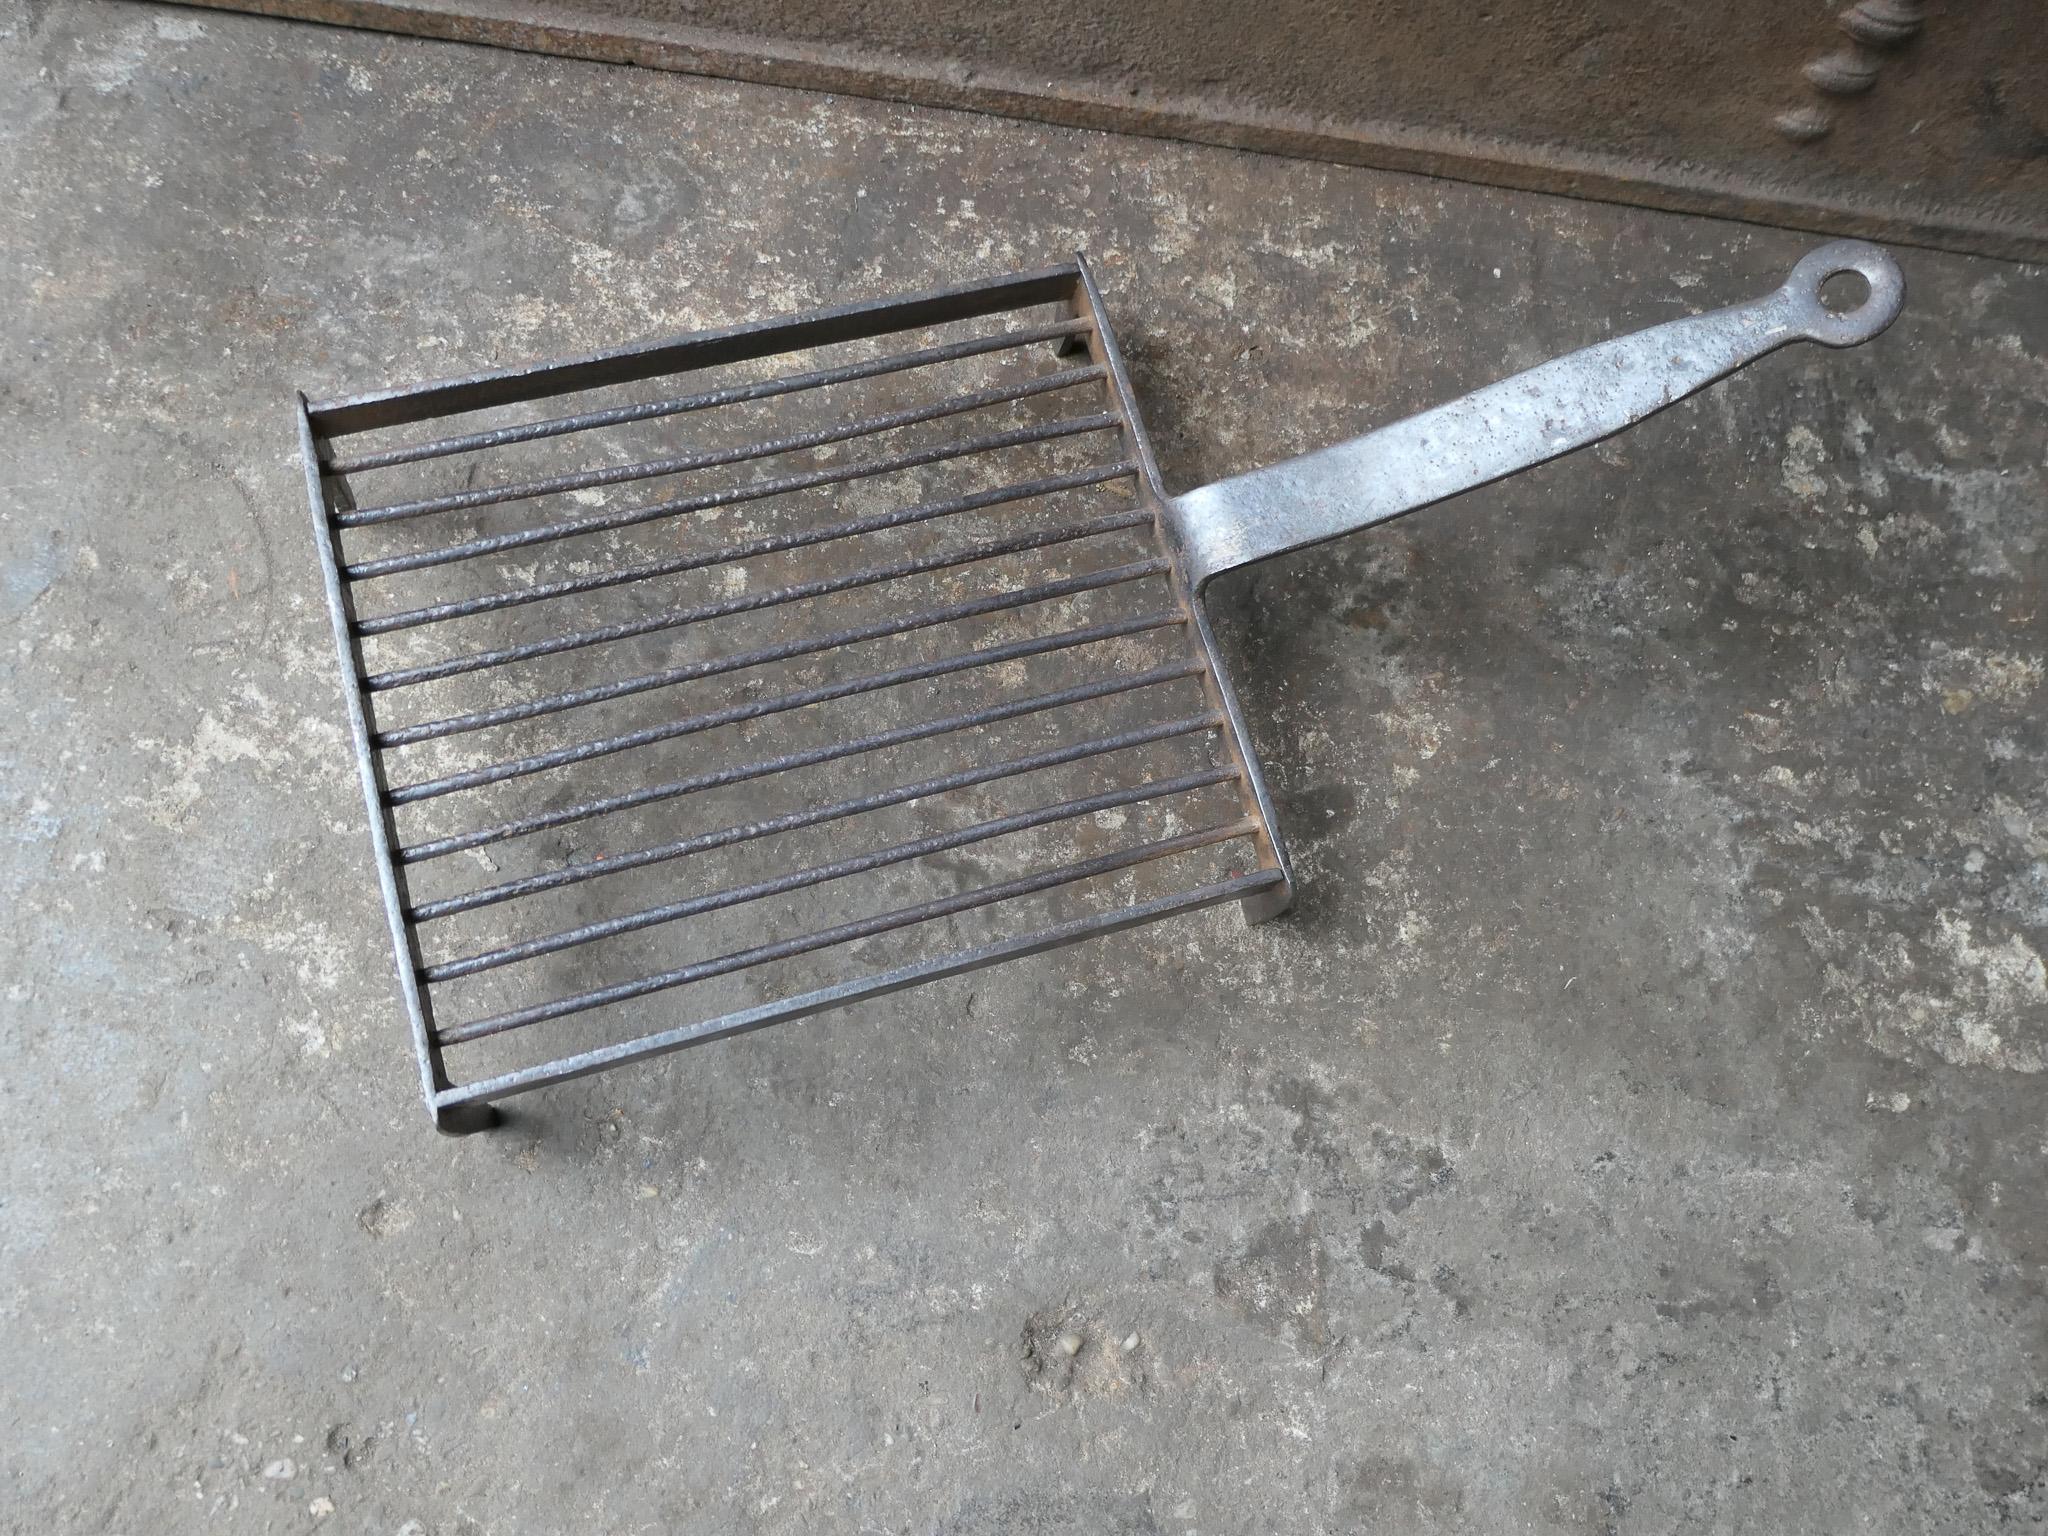 Large 19th century hand forged French gridiron, made of wrought iron. It is used to grill small pieces of meat quickly over the fire. Sometimes they are put in the fire or else on a trivet, depending on the size of the fire. The gridiron is in a